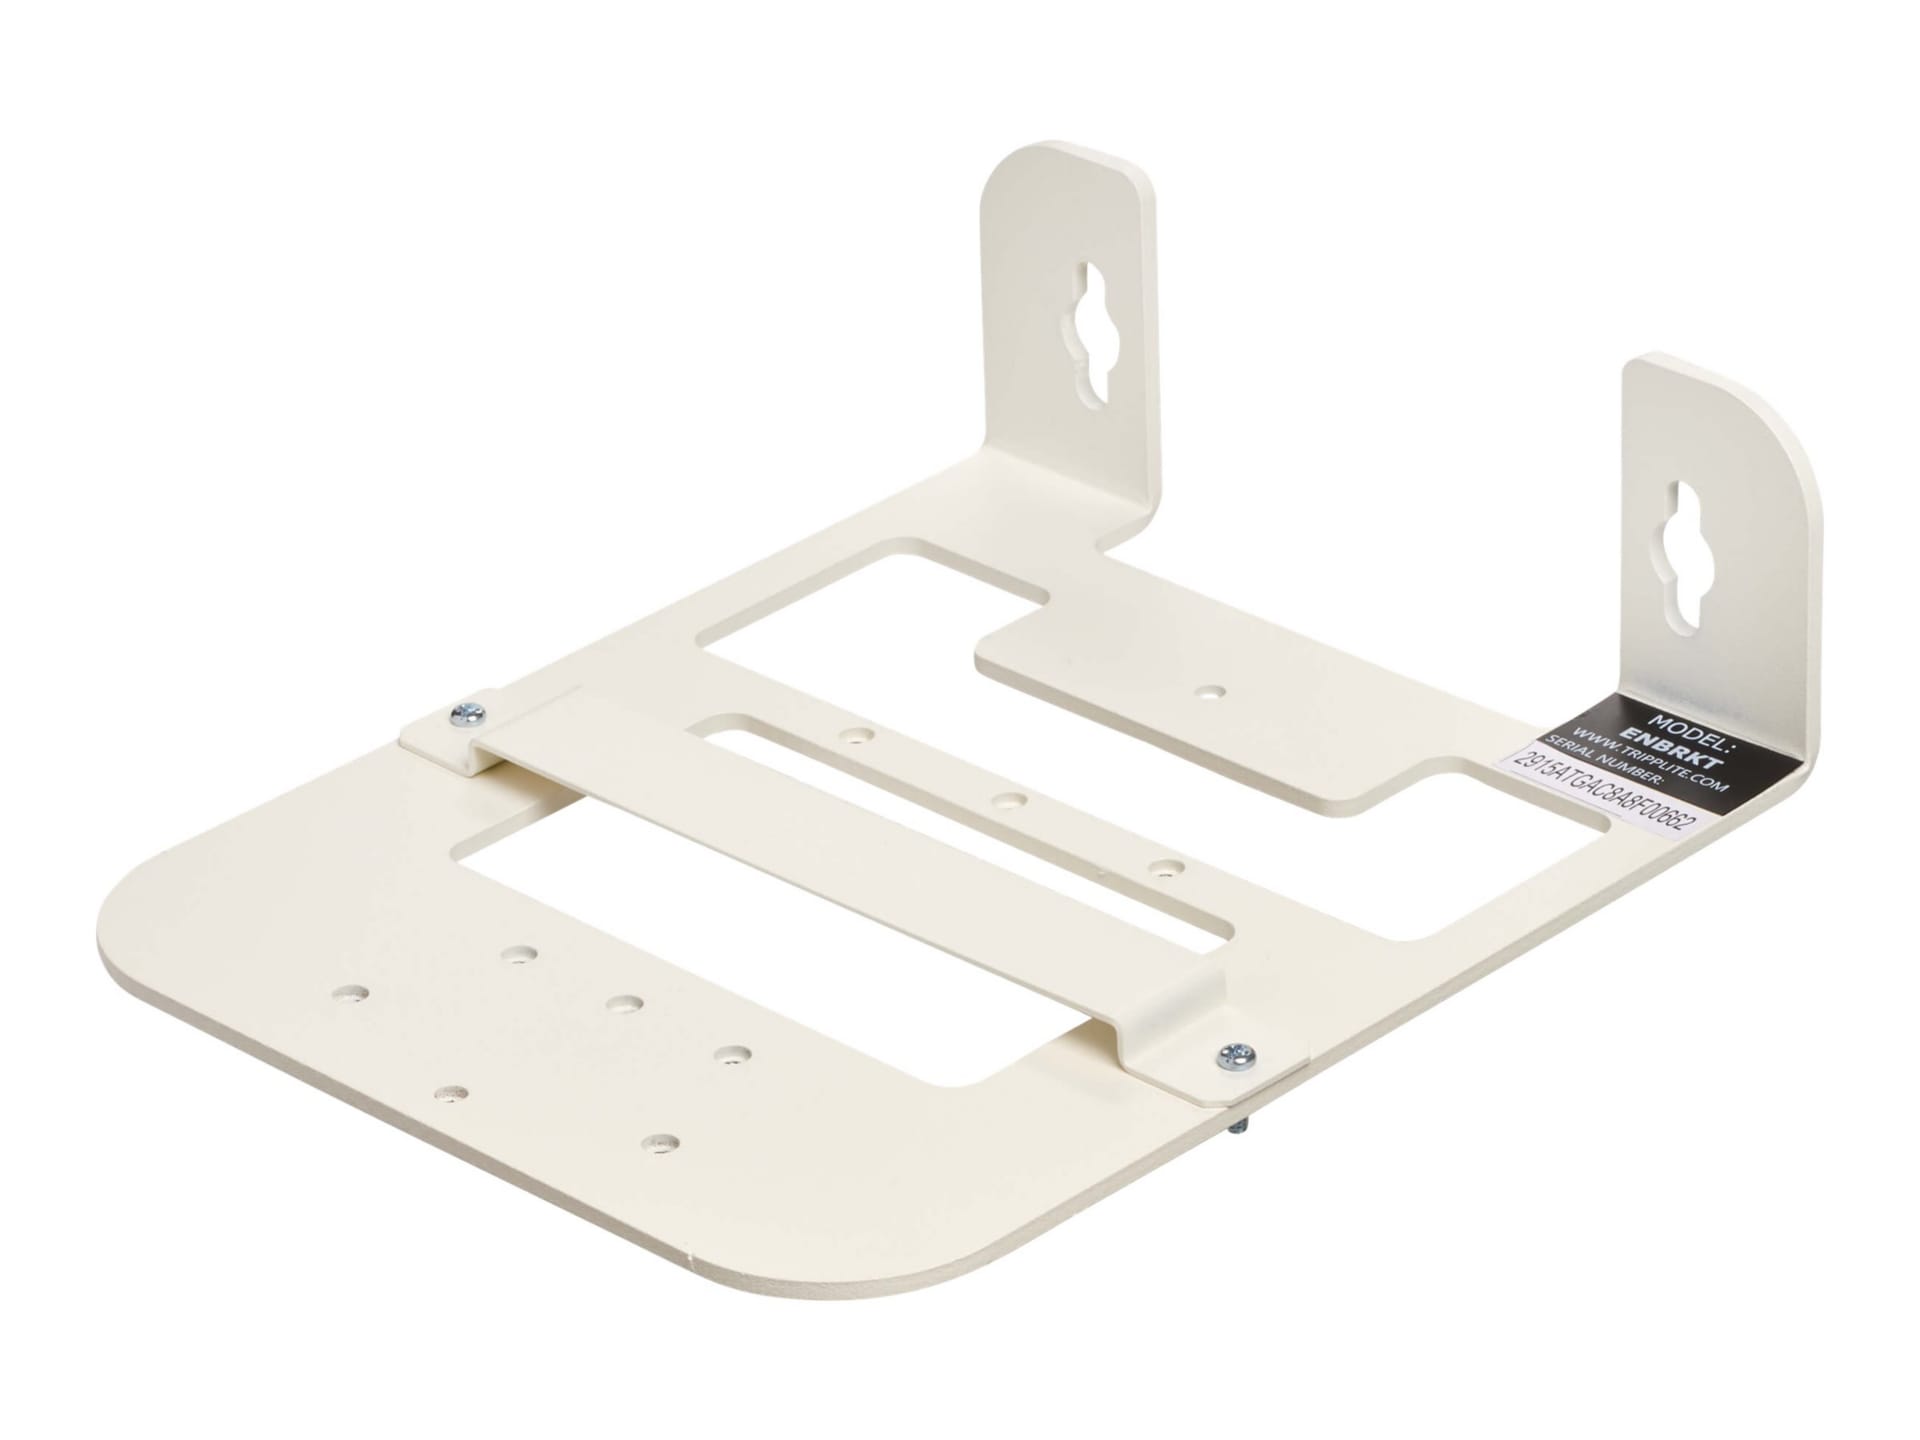 Tripp Lite Universal Wall Bracket for Wireless Access Point - Right Angle, Steel, White - network device mounting